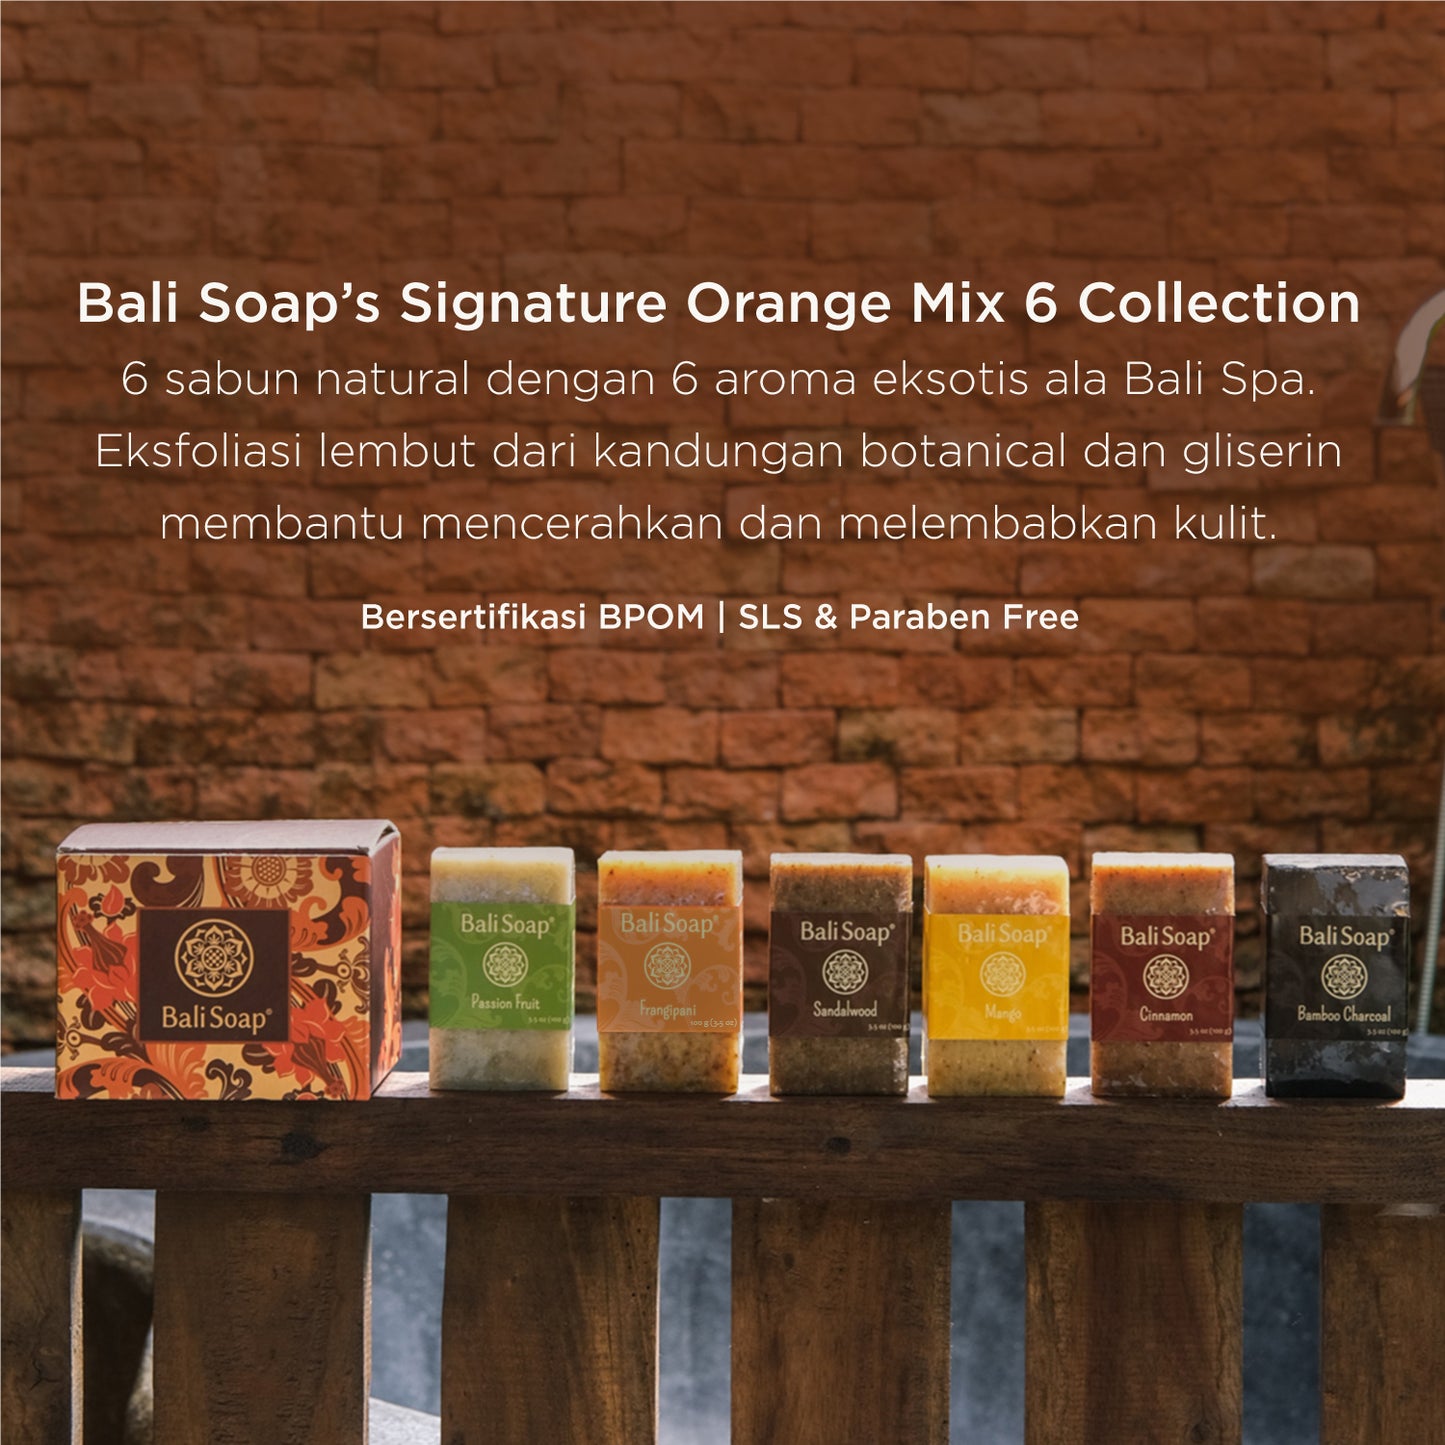 PACKAGE CONTENT 6 SOAP BAR - ORANGE COLLECTION